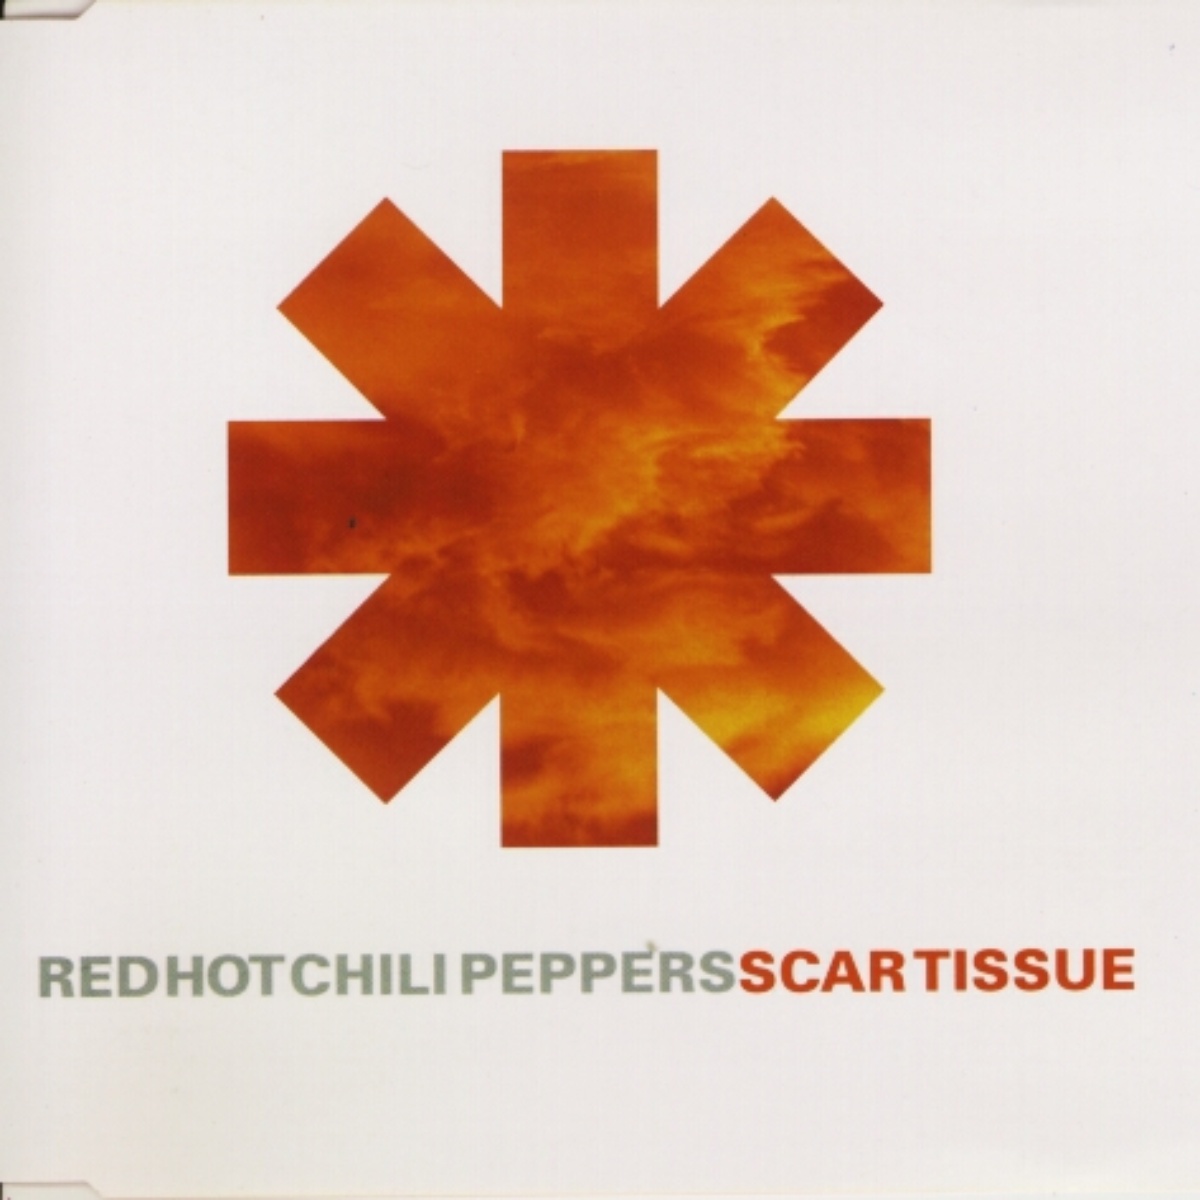 Red hot chili peppers tissue. Red hot Chili Peppers. Scar Tissue Red hot Chili Peppers. Scar Tissue Red hot Chili Peppers обложка. Scar Tissue Red hot.